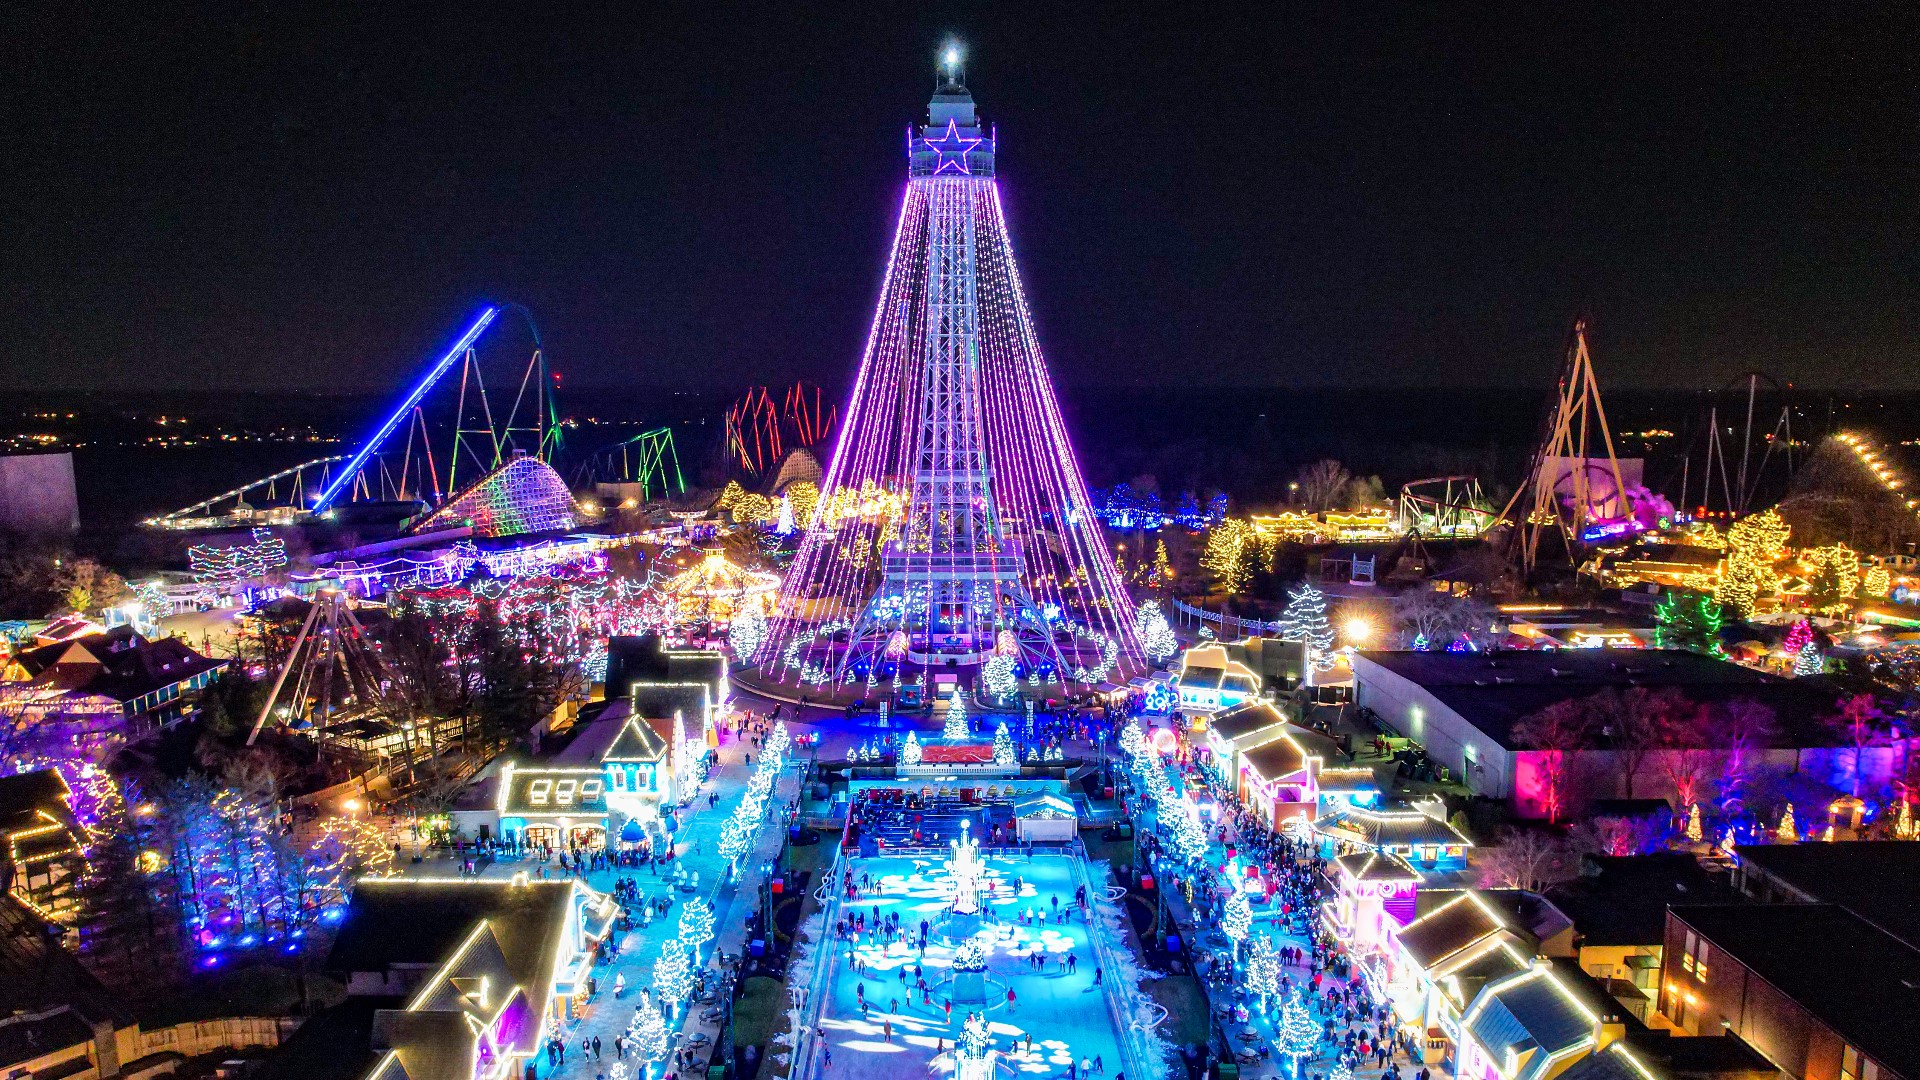 WinterFest will take over Kings Island beginning Nov. 25 through Dec. 31, turning the 364-acre amusement park into 11 different winter wonderlands.